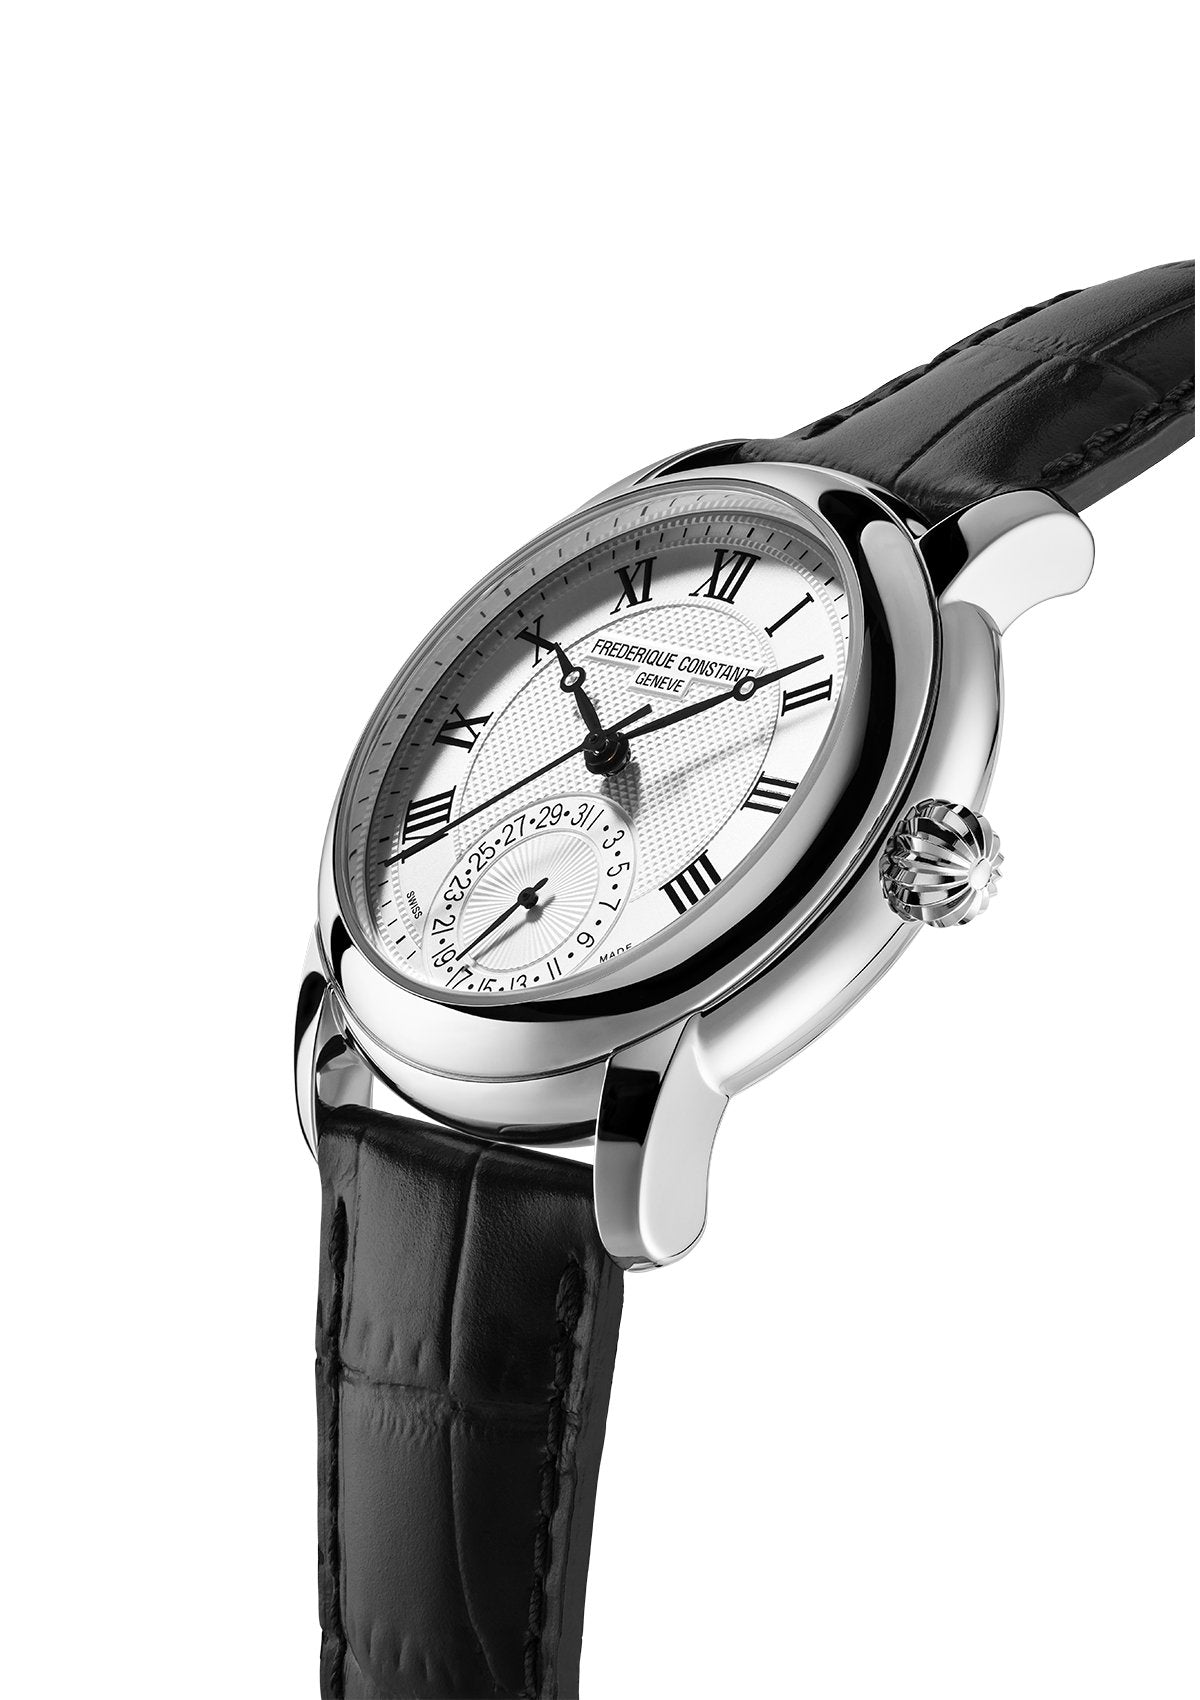 Frederique Constant Men's Classic Manufacture Watch - Watches & Crystals